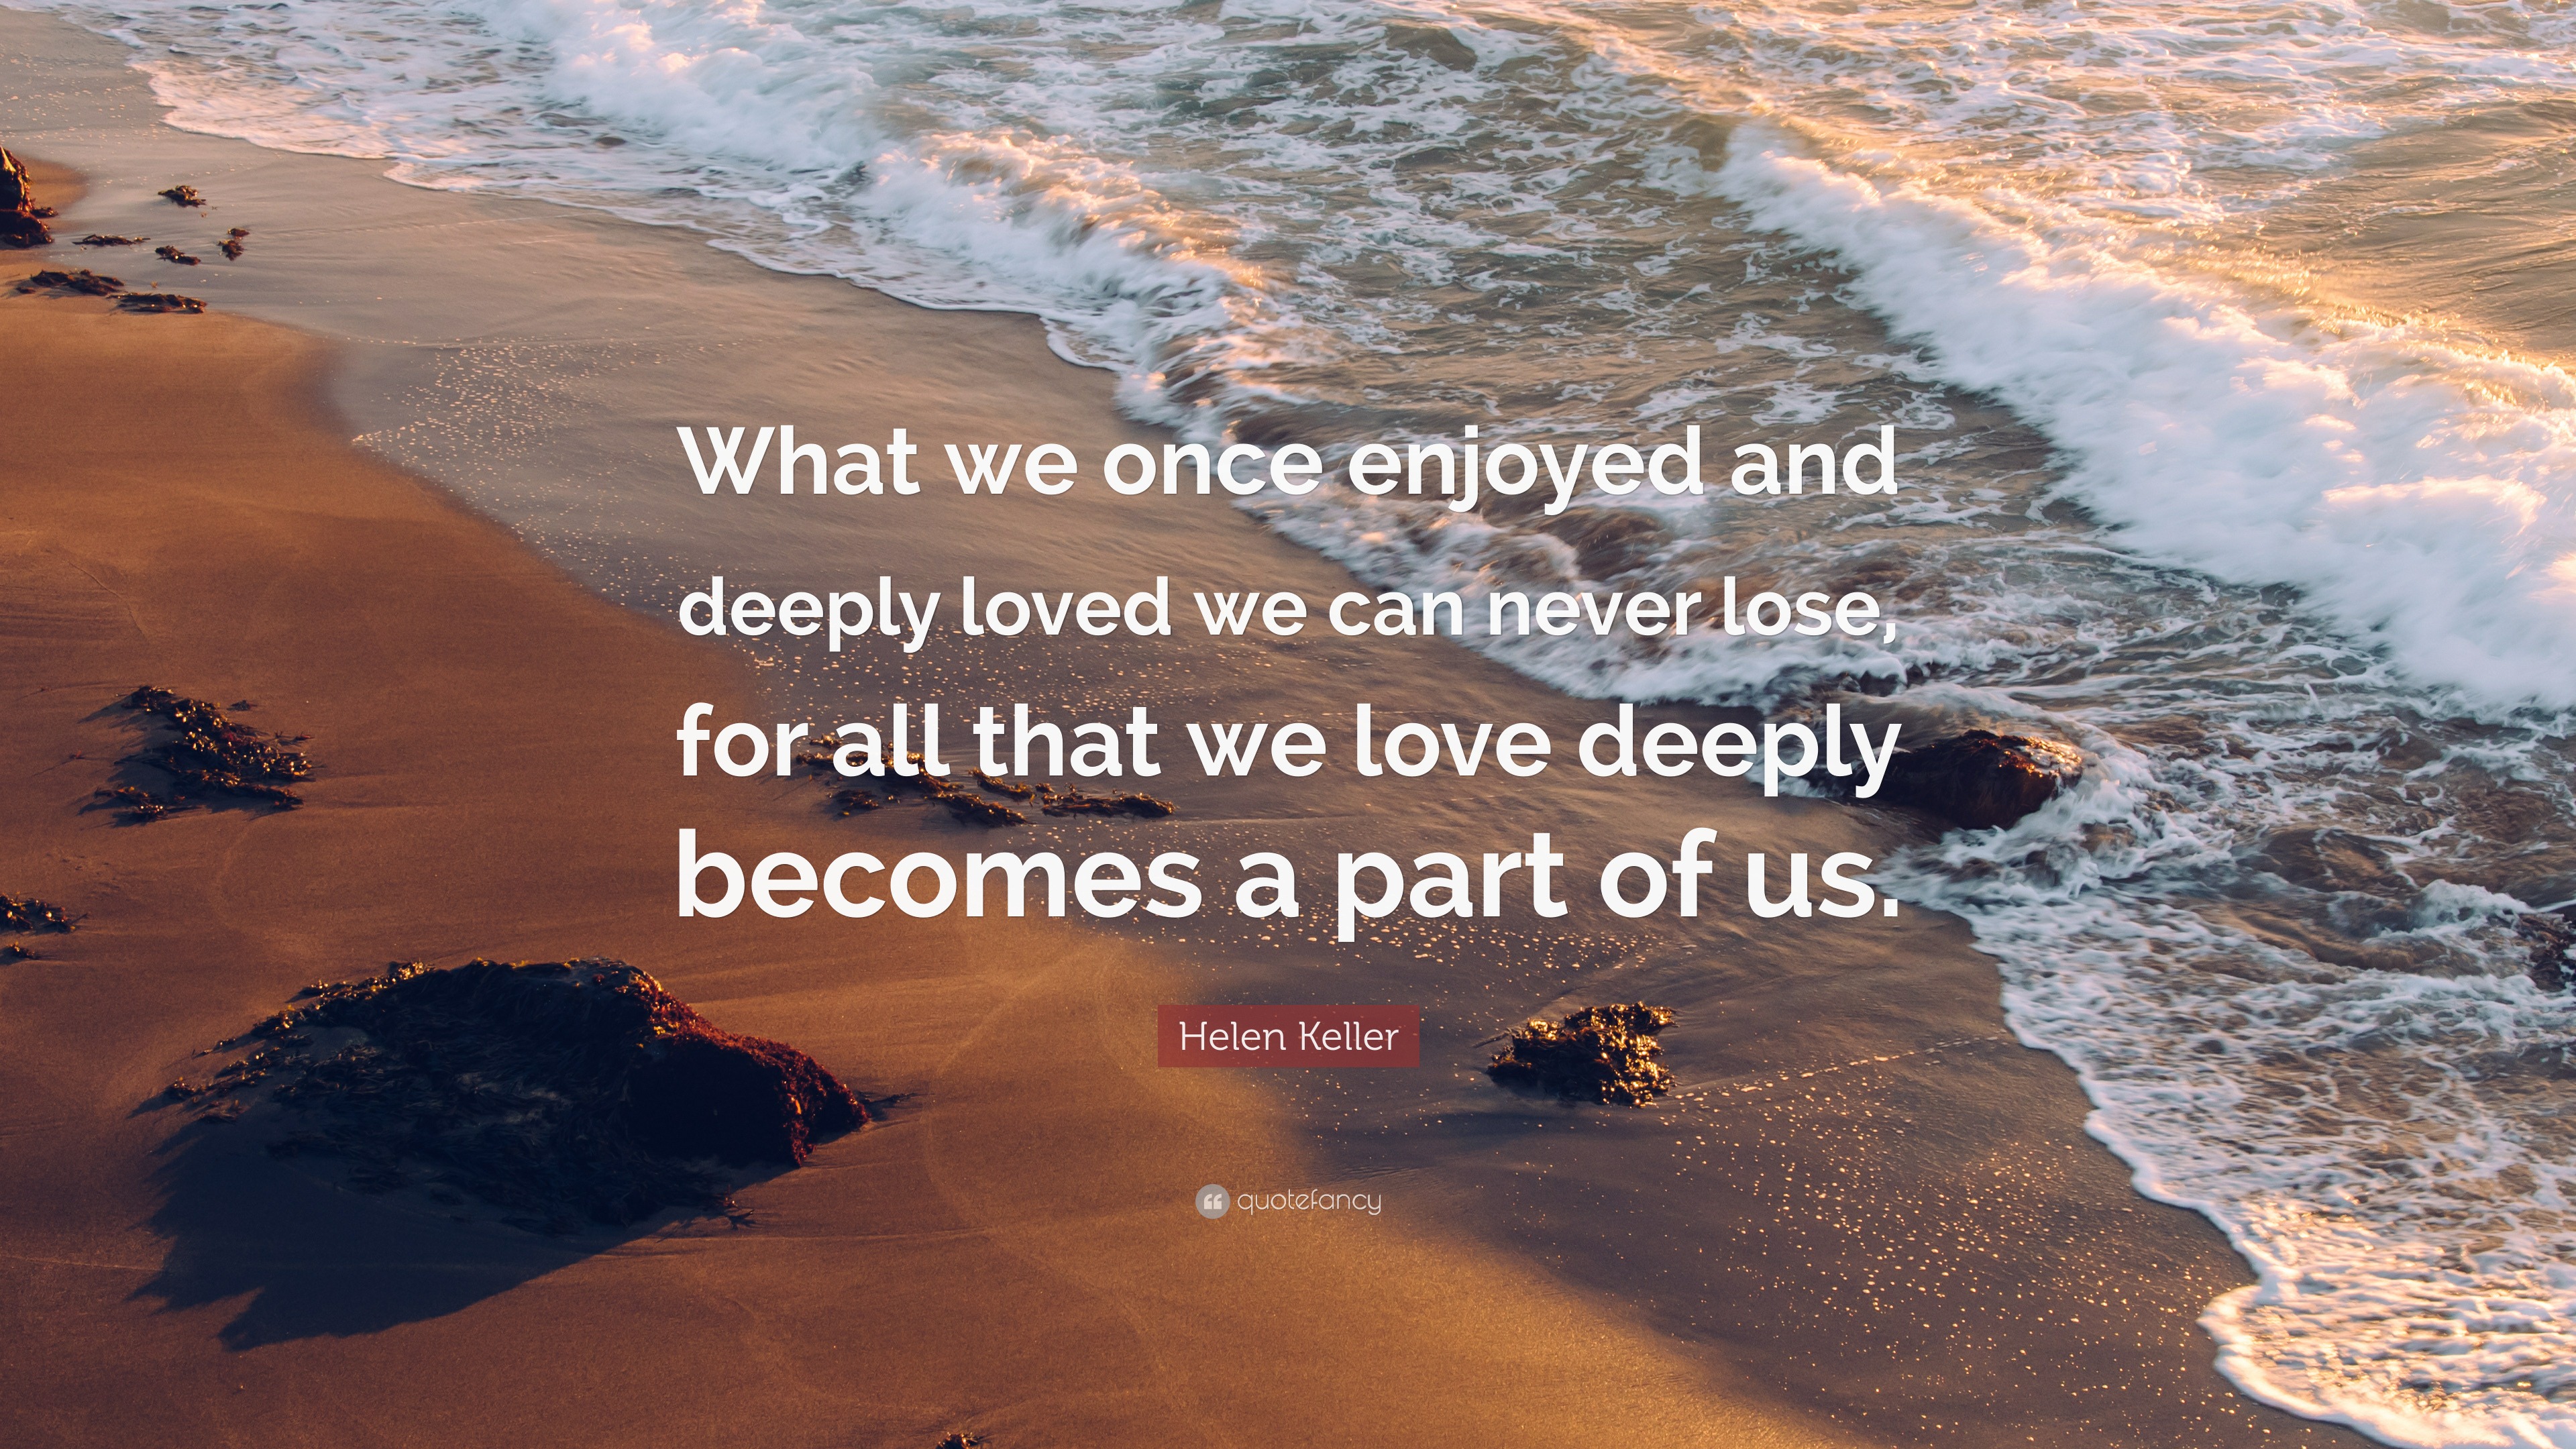 Helen Keller Quote: “What we once enjoyed and deeply loved we can never ...